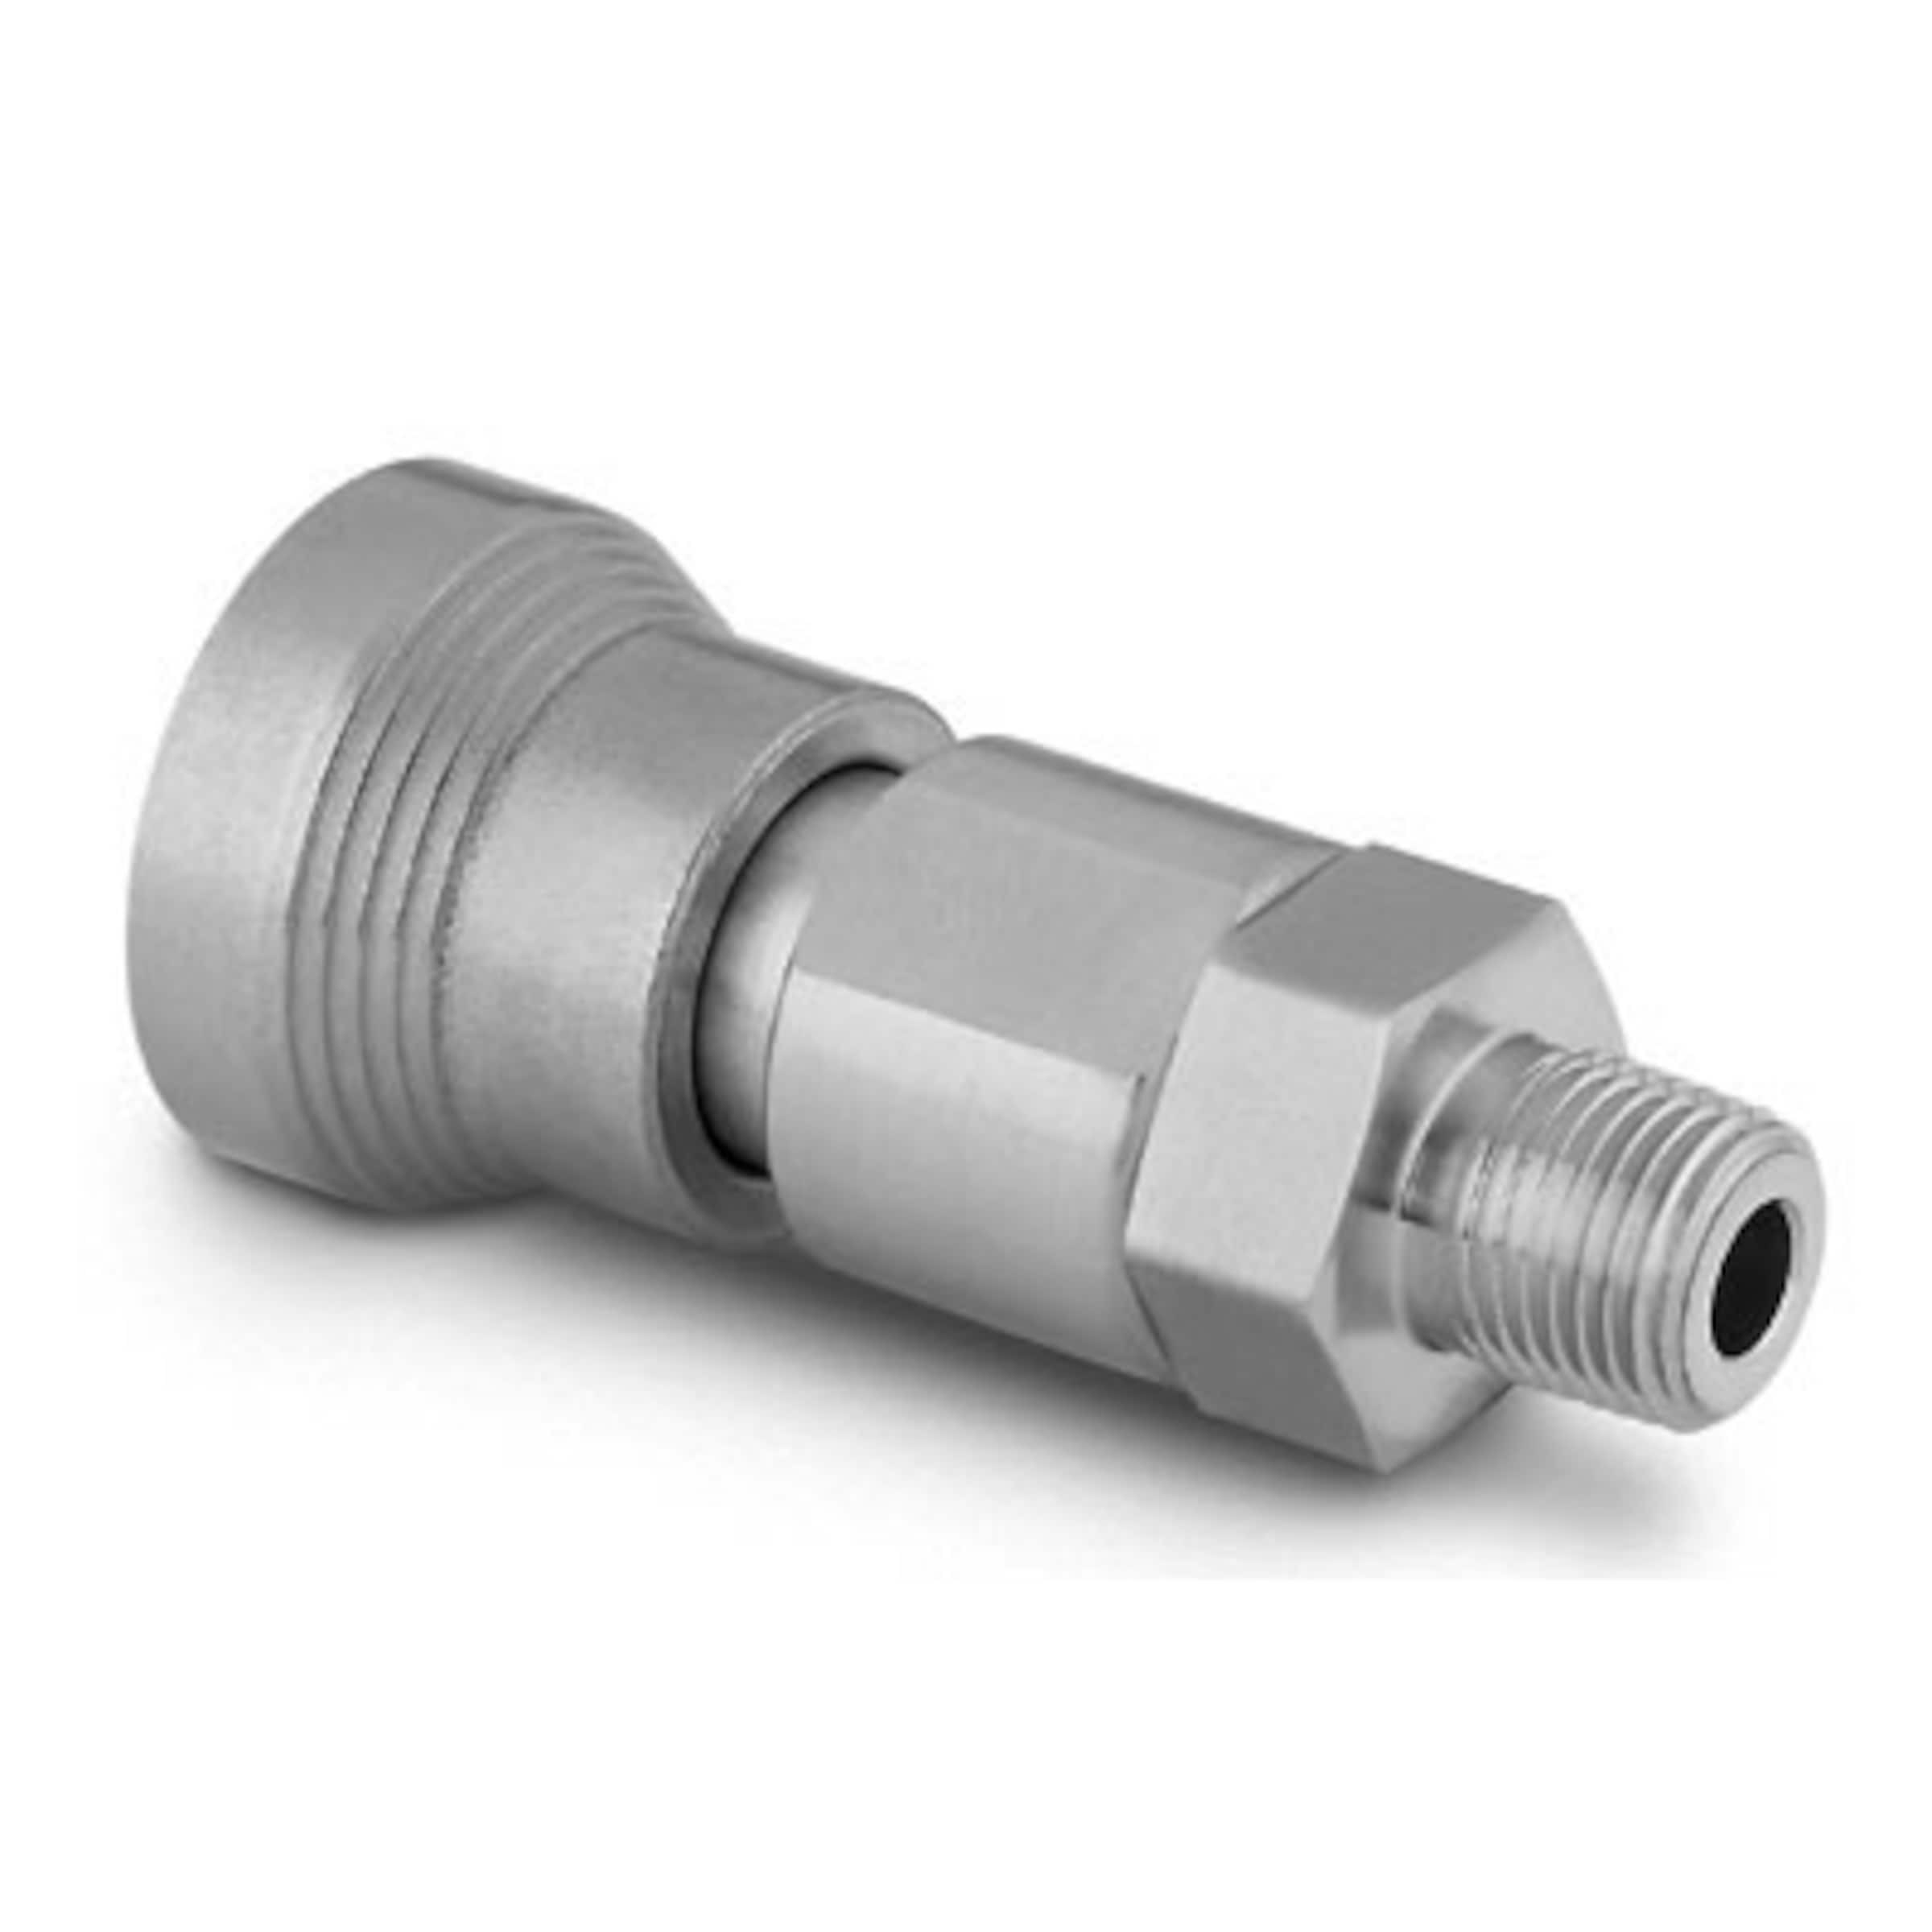 Details about  / NEW SWAGELOK 3//8/" STAINLESS STEEL SS-QC6-S-6HCK4 QUICK CONNECT D9HDH0134S